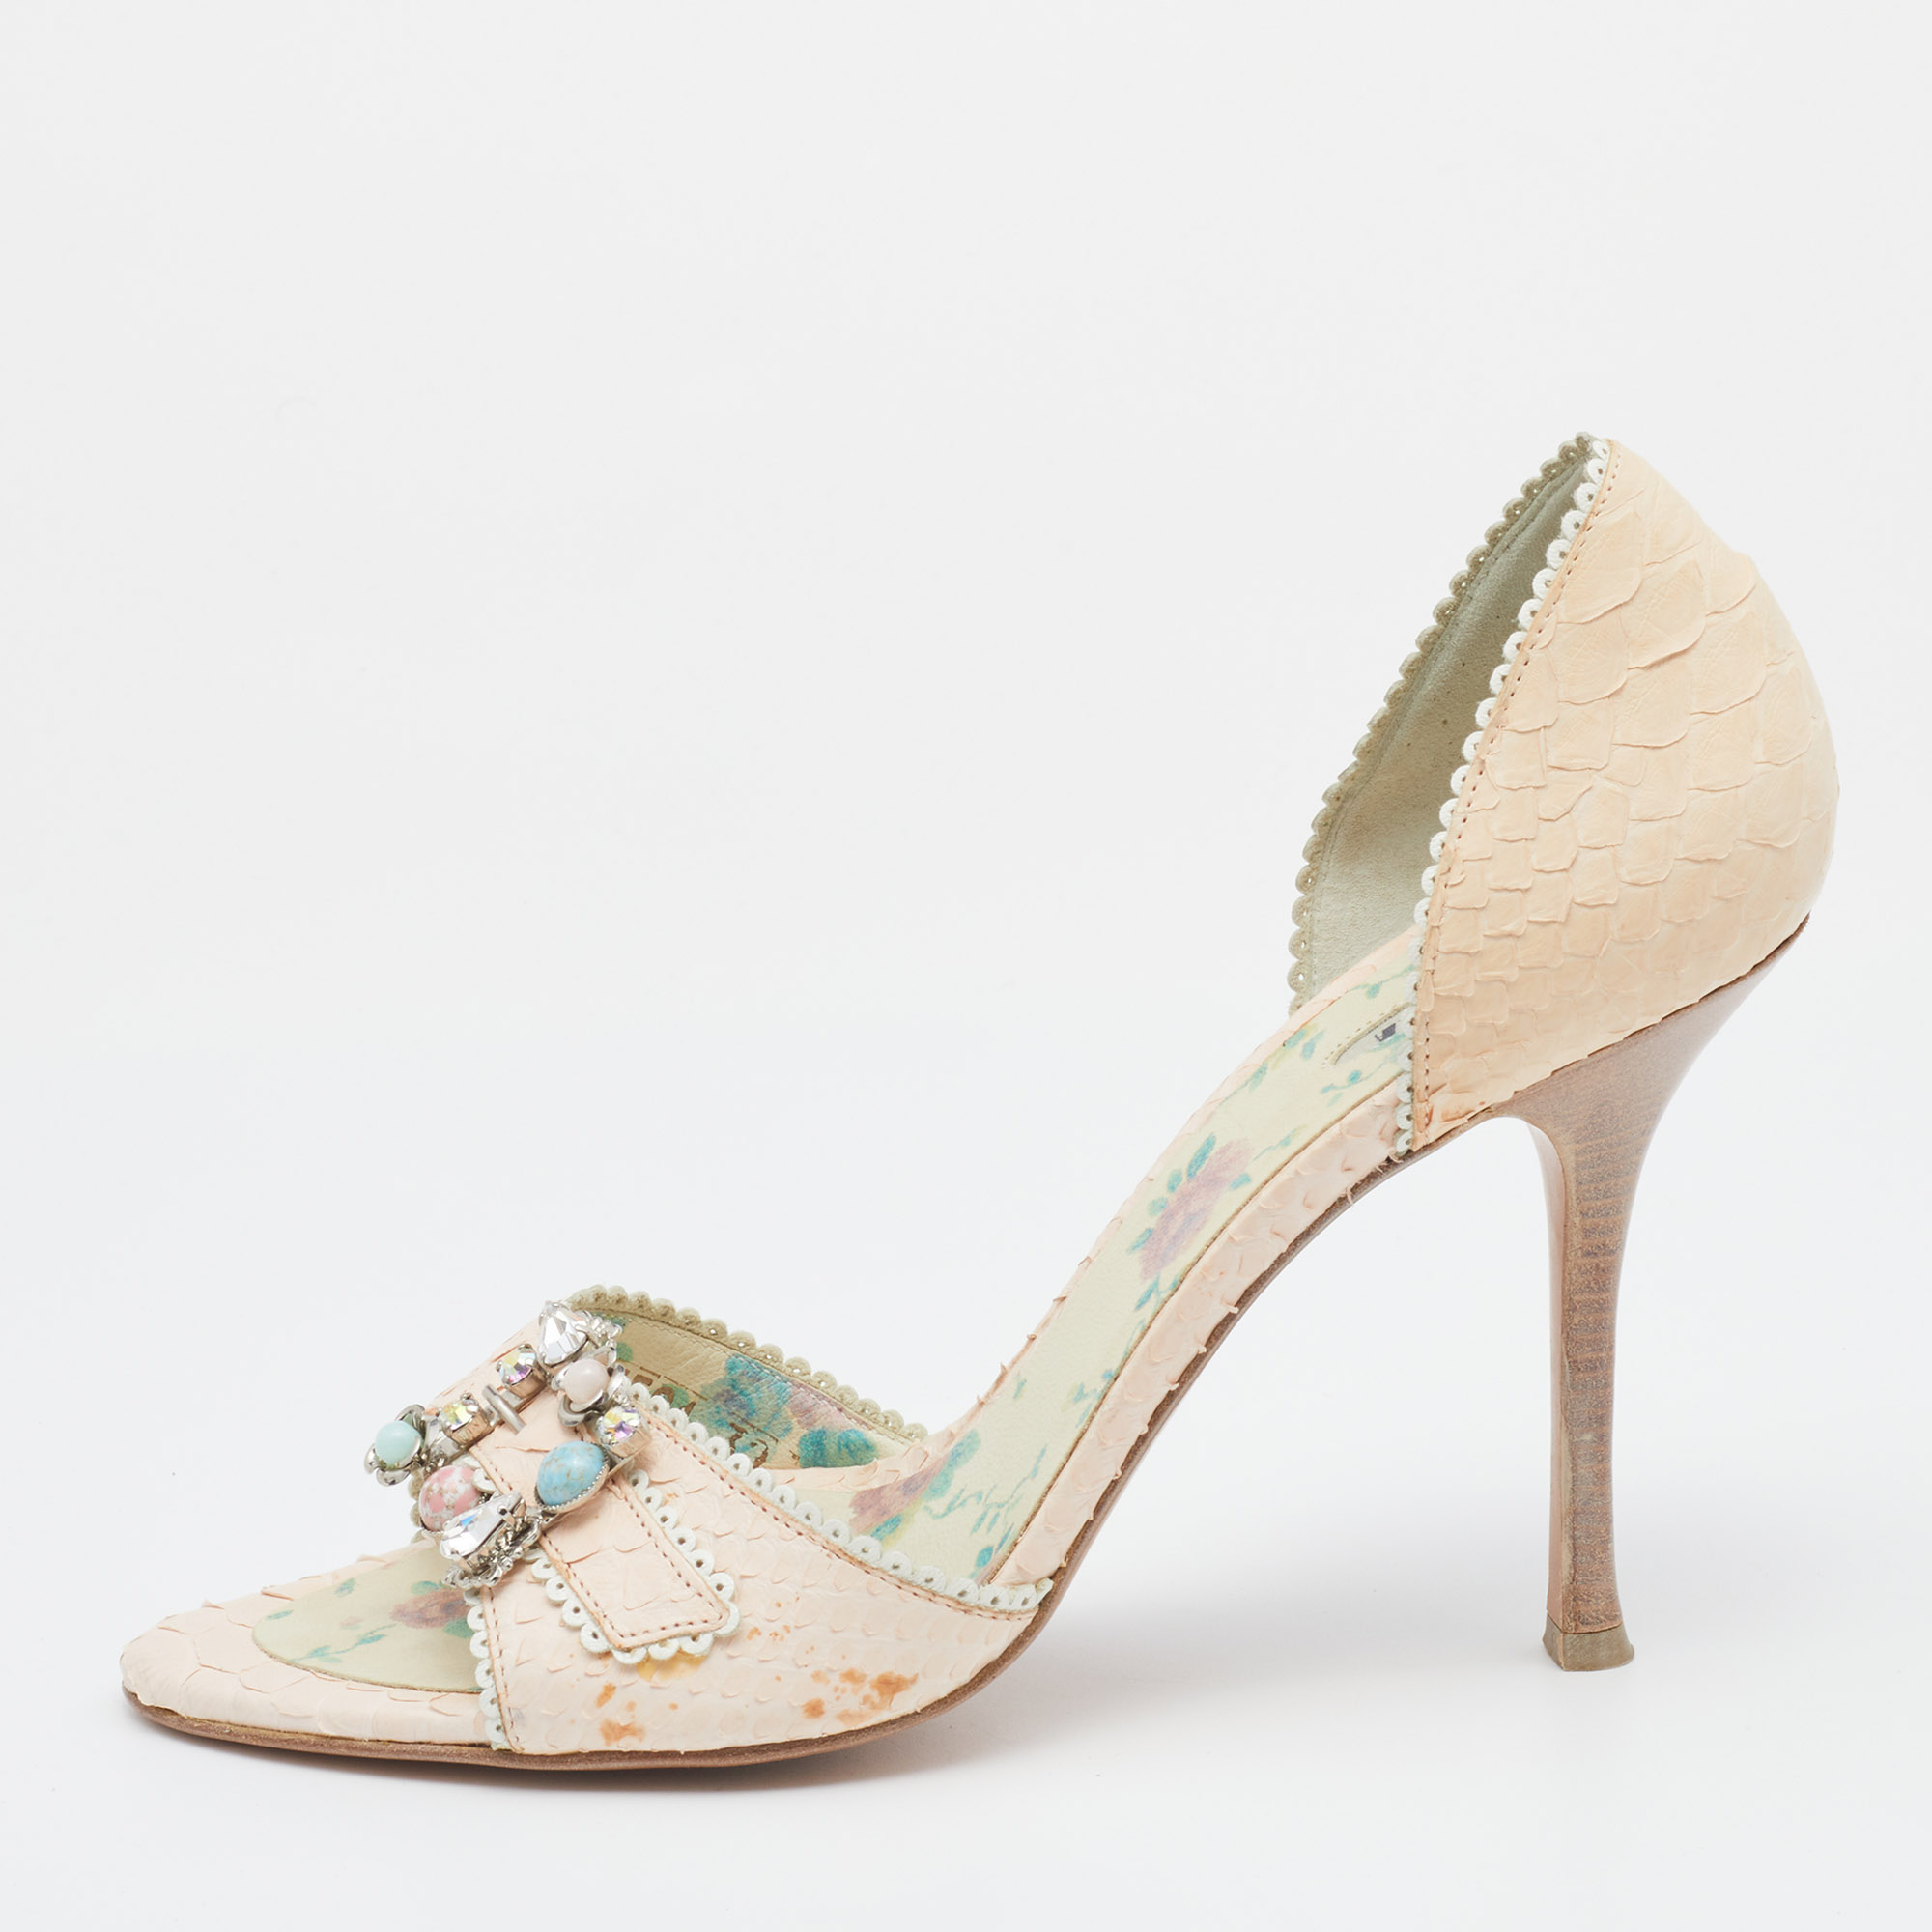 Pre-owned Le Silla Pale Pink Python Leather Embellished D'orsay Open Toe Pumps Size 39